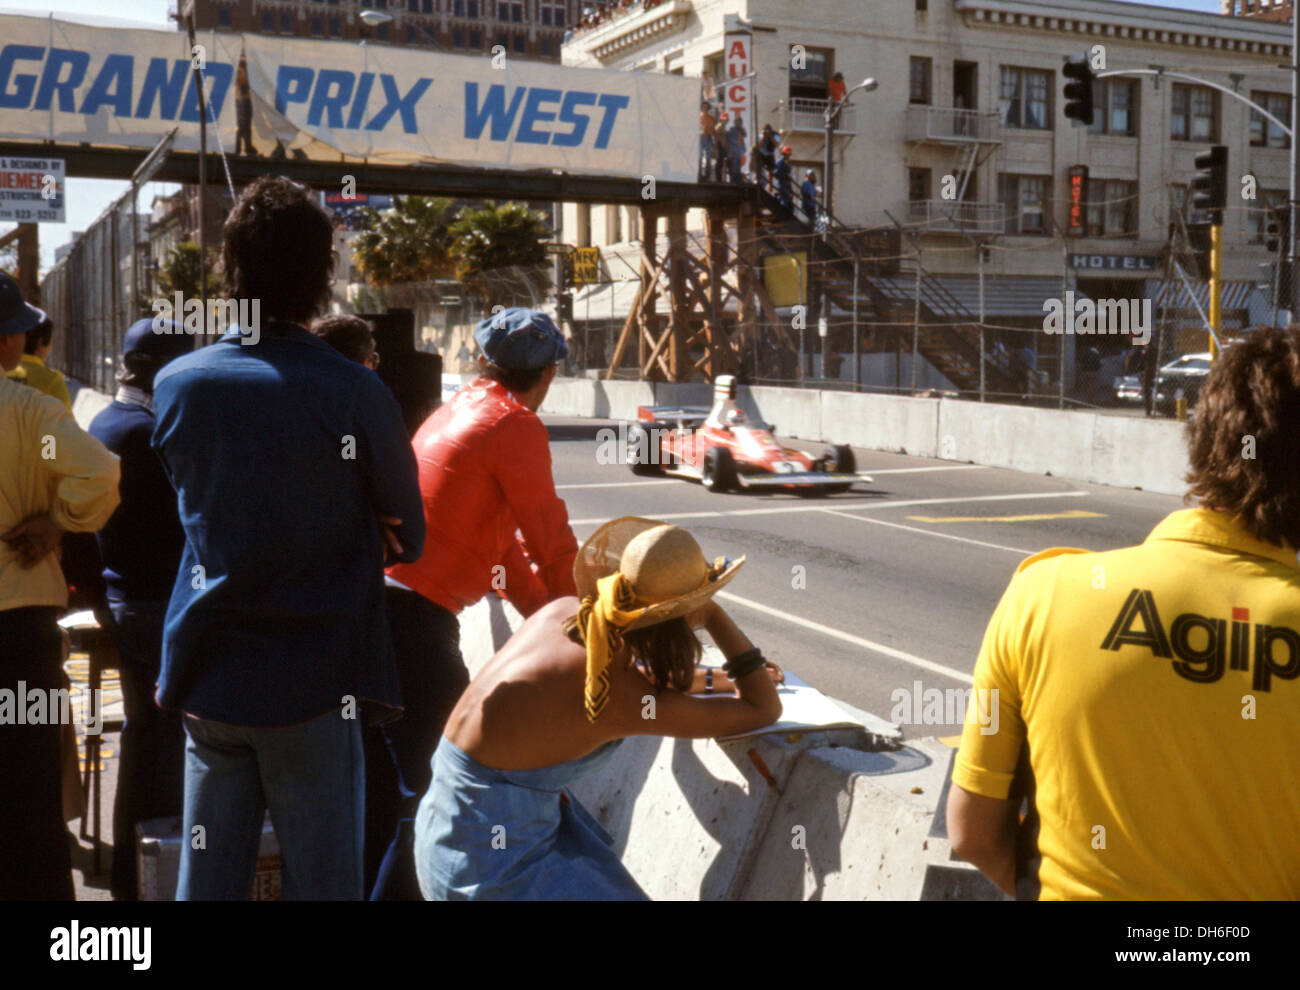 A Ferrari at the US Grand Prix West in Long Beach on 28 March 1976.